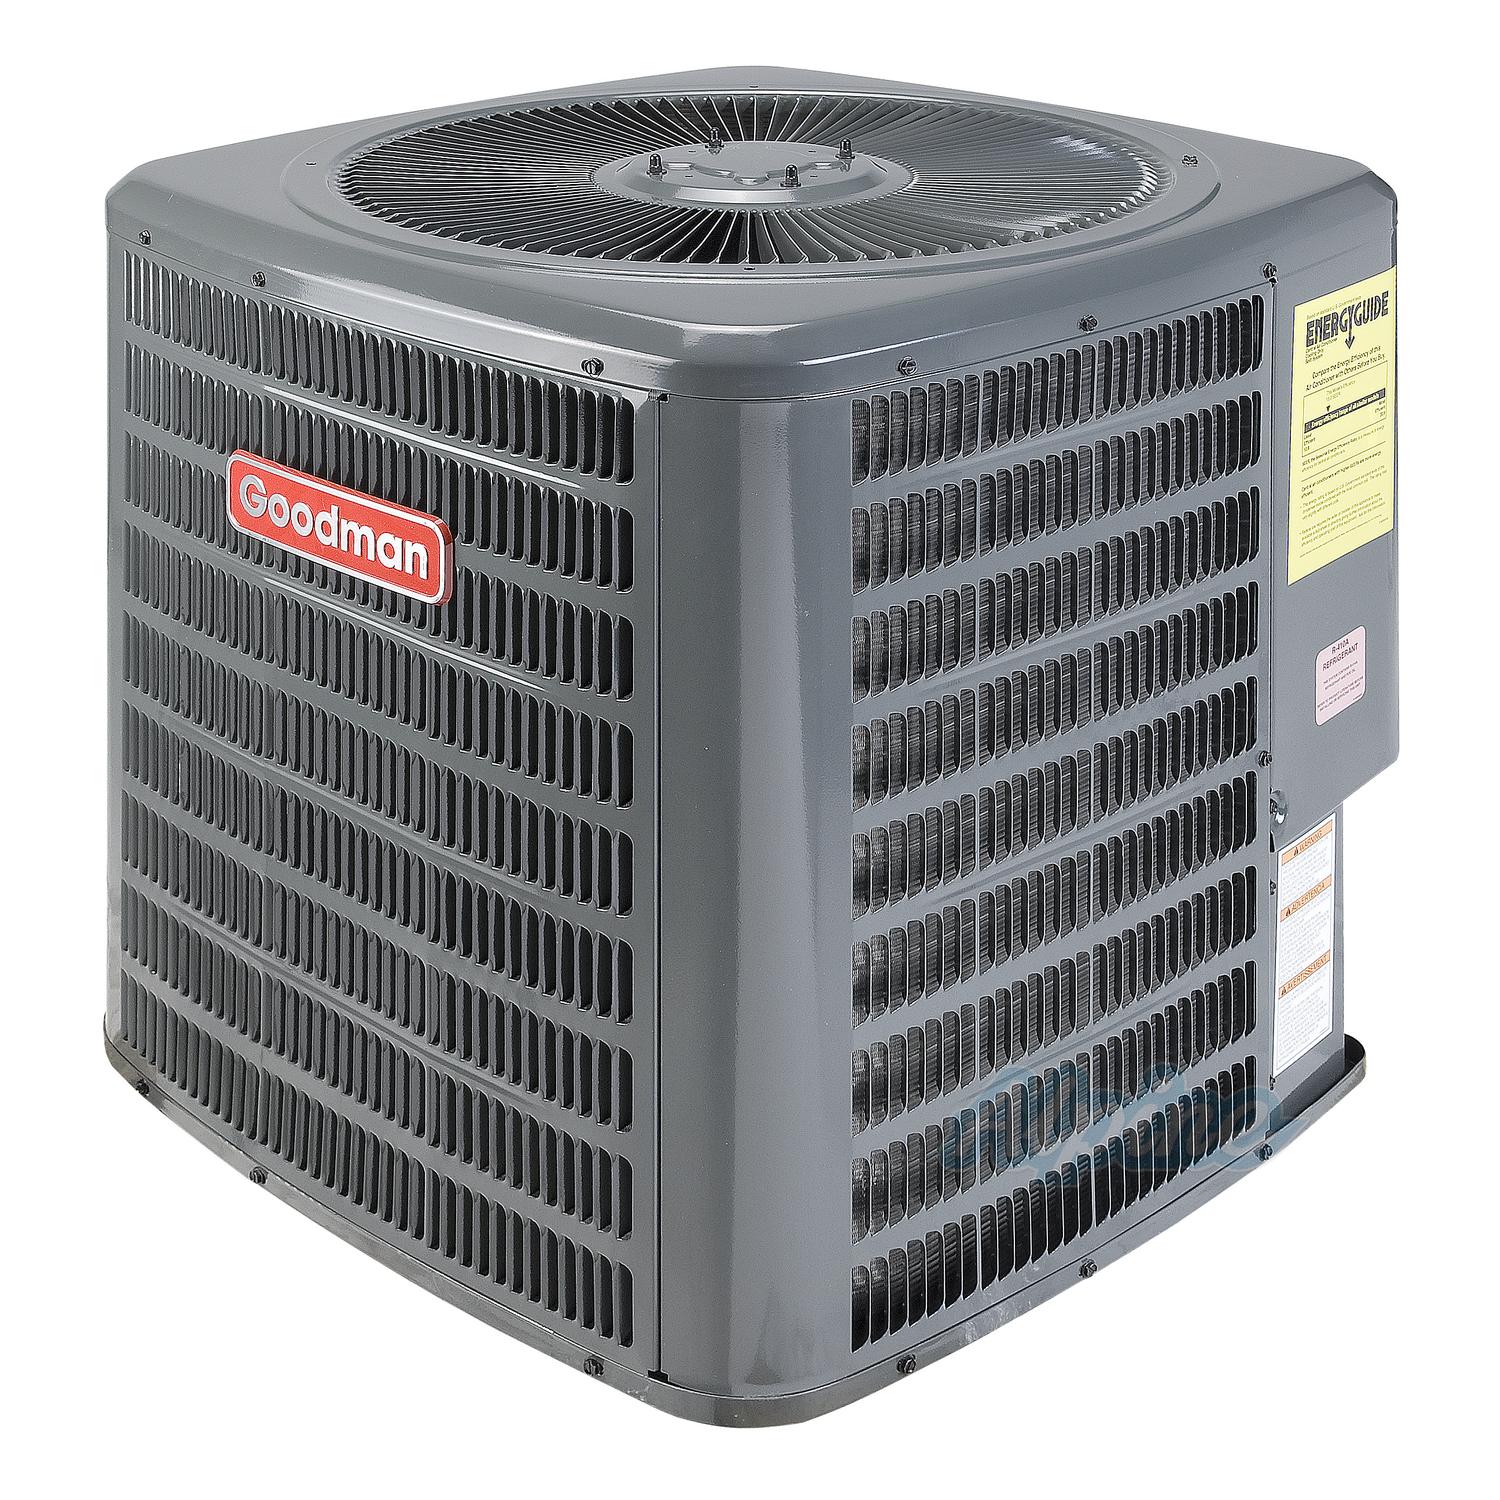 Goodman Ton Seer Air Conditioner System With Evaporator Coil | My XXX ...